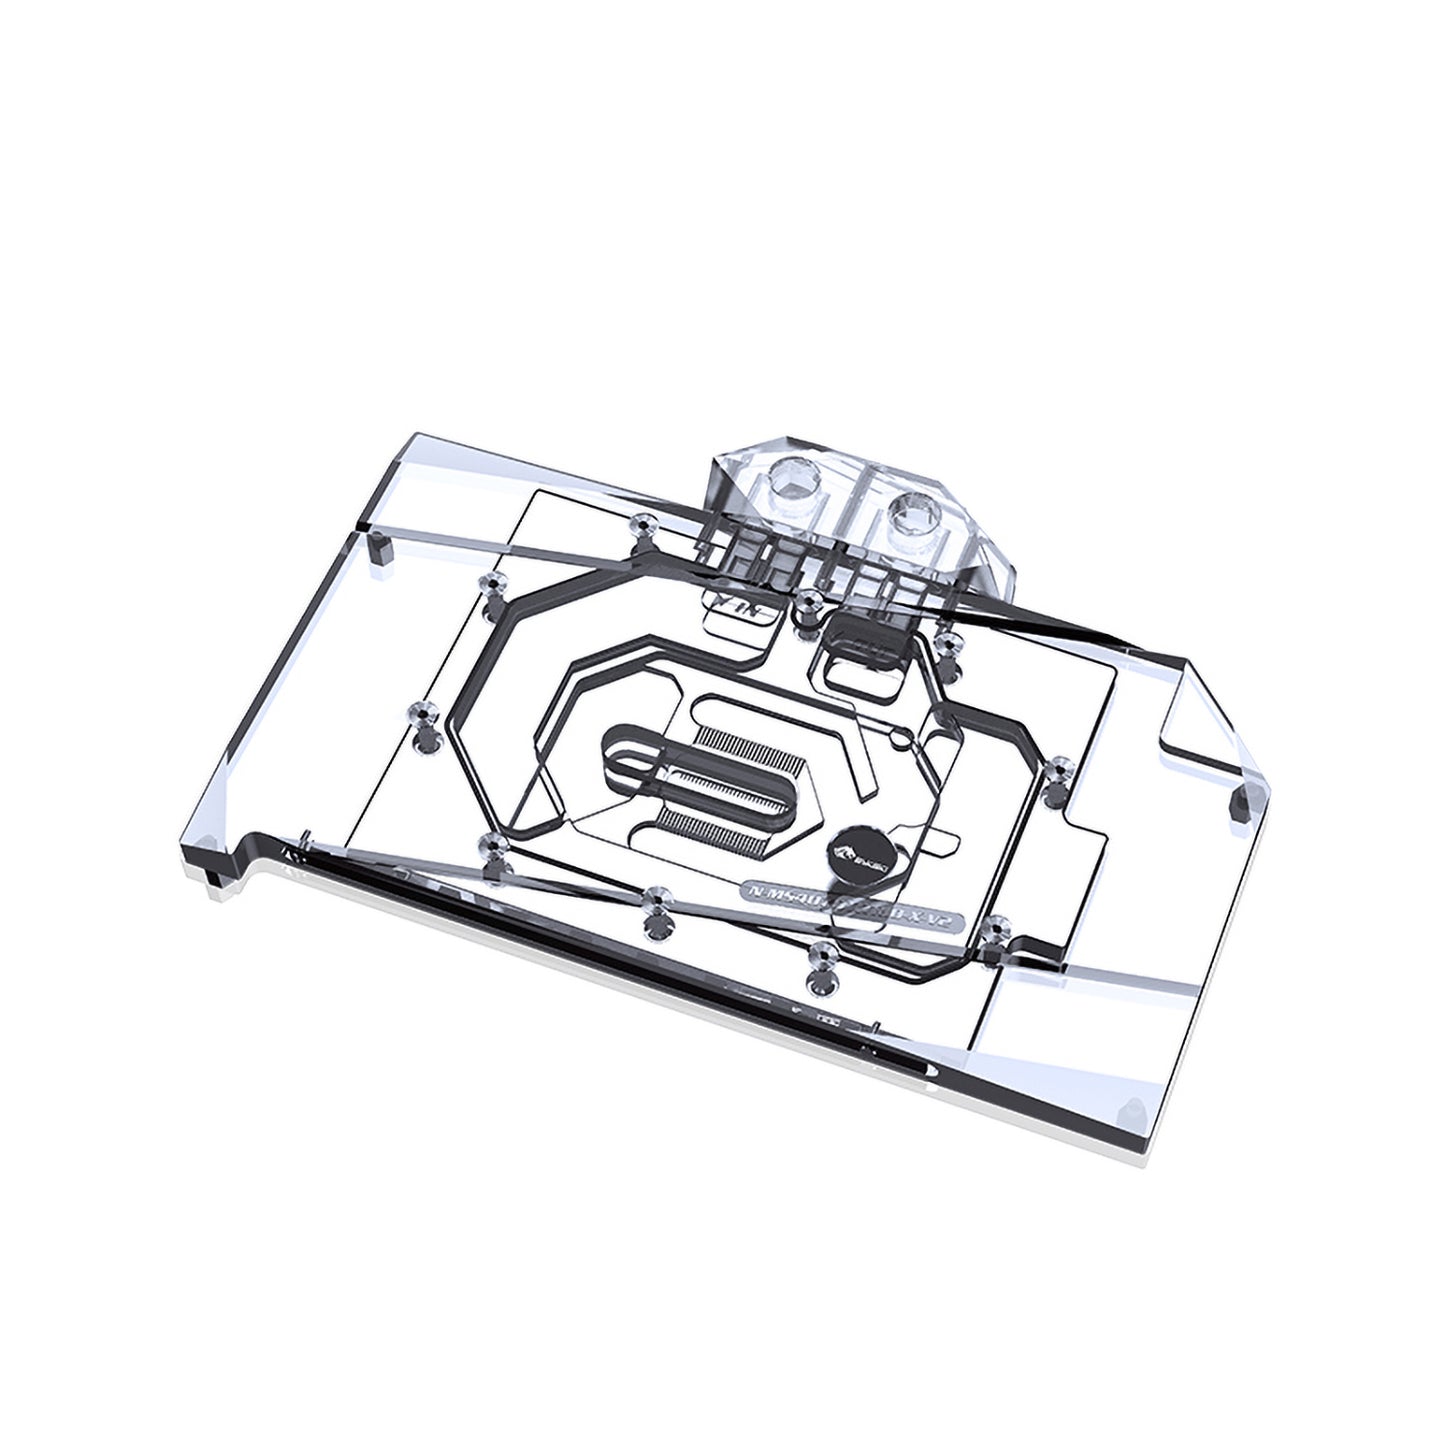 Bykski GPU Water Block For MSI RTX 4070 Ti Suprim X 12G, Full Cover With Backplate PC Water Cooling Cooler, N-MS4070TITRIO-X-V2